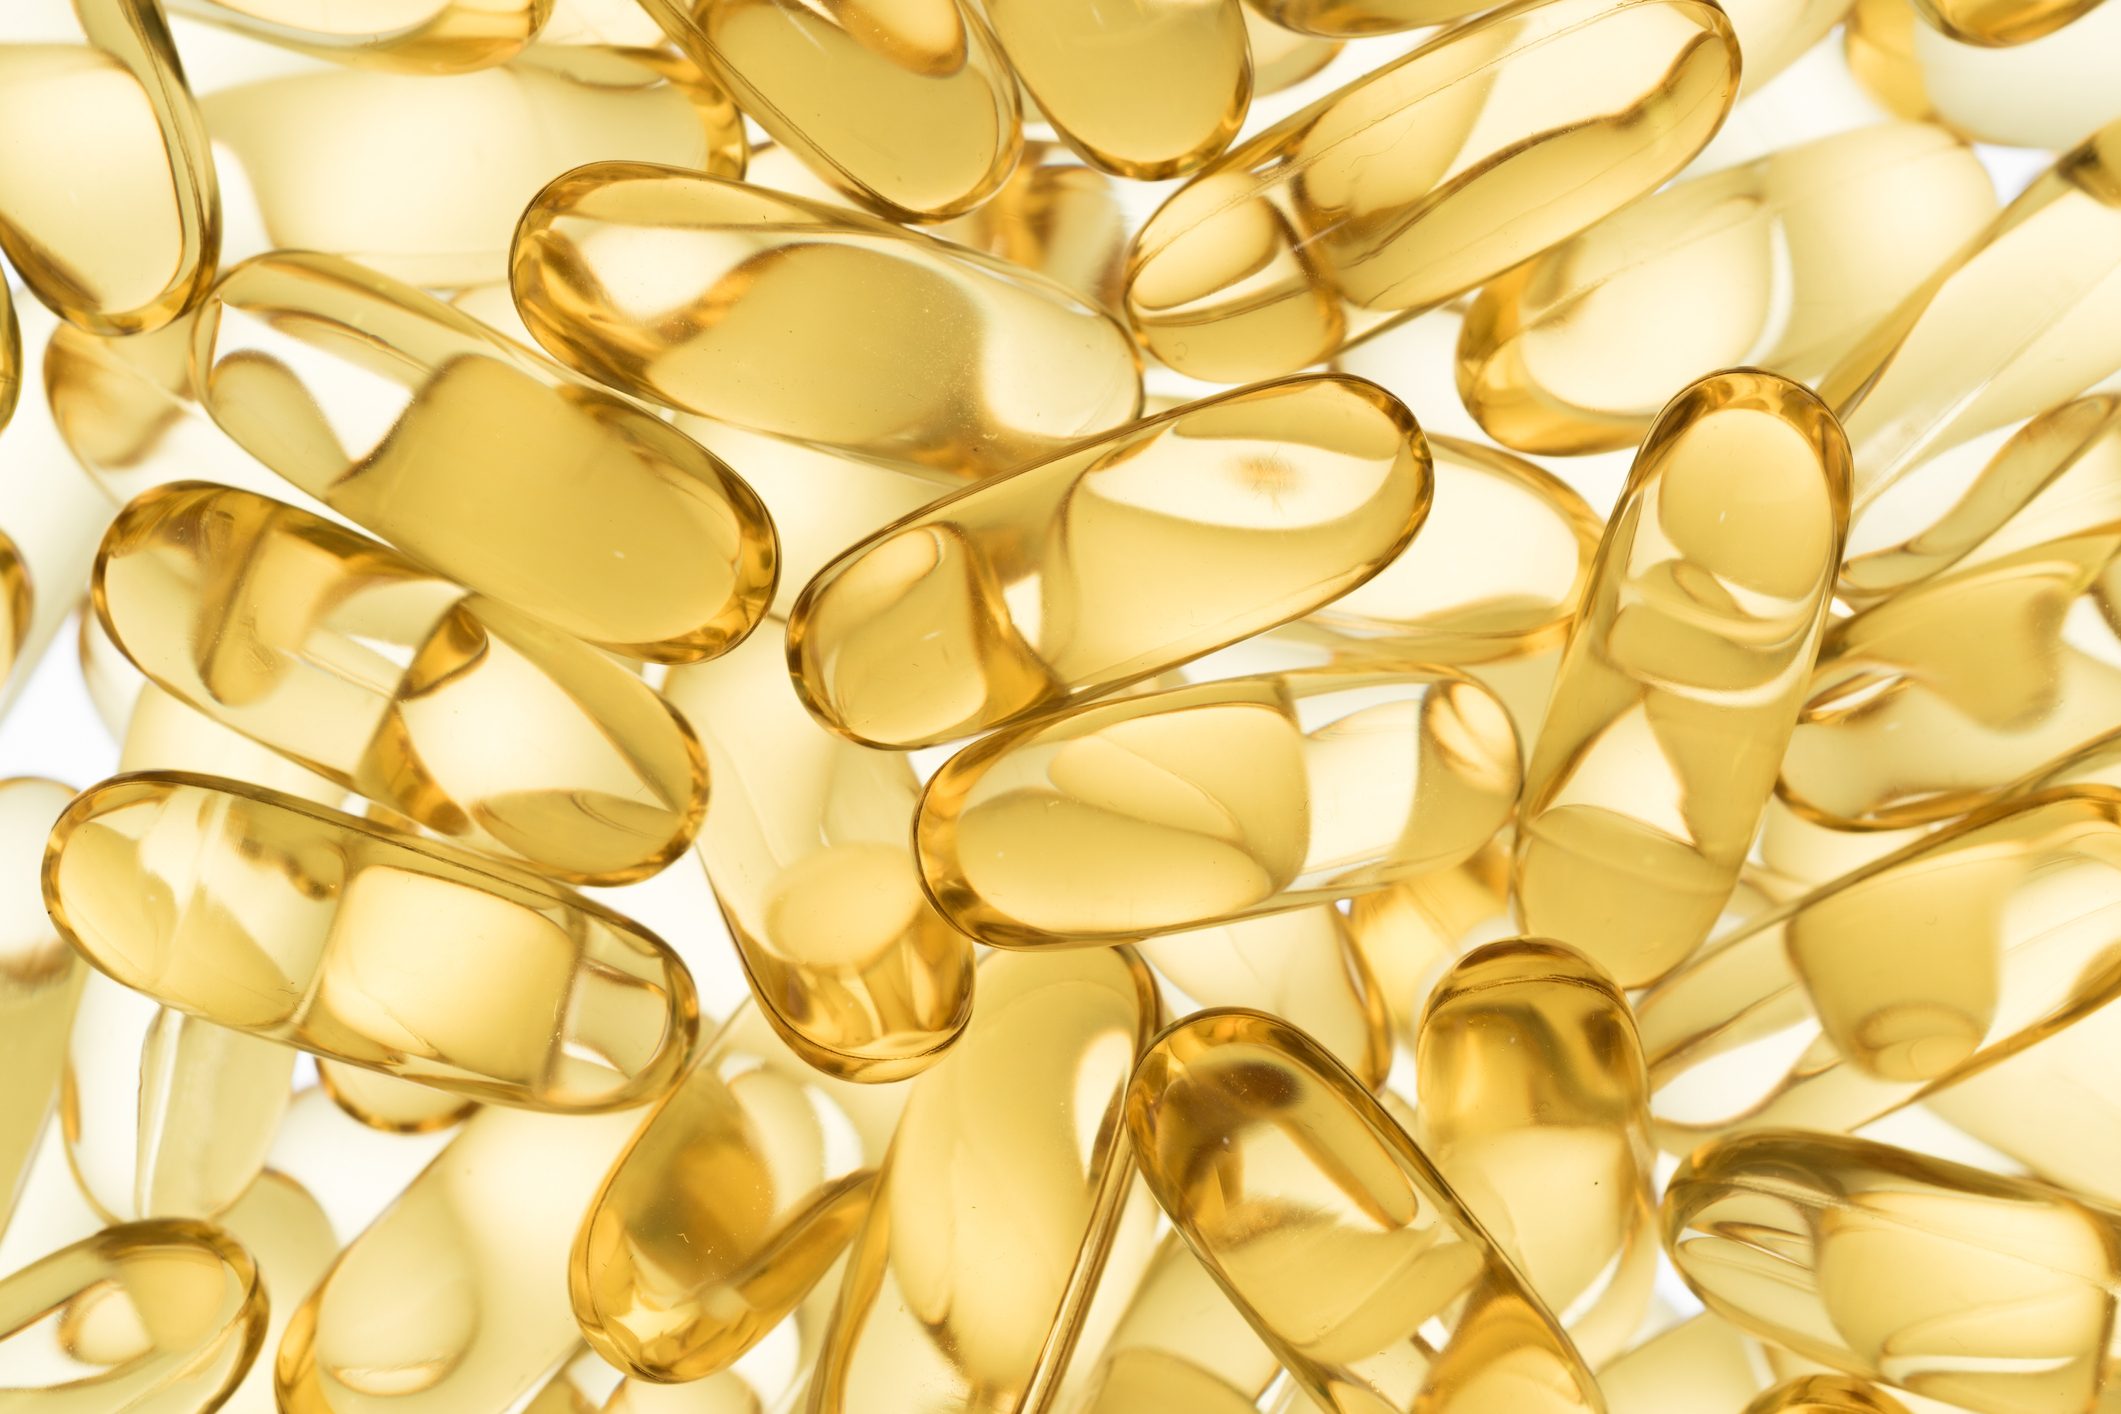 New Research: If You’re Deficient in This Vitamin, It Could Raise Your Stroke Risk by 28%